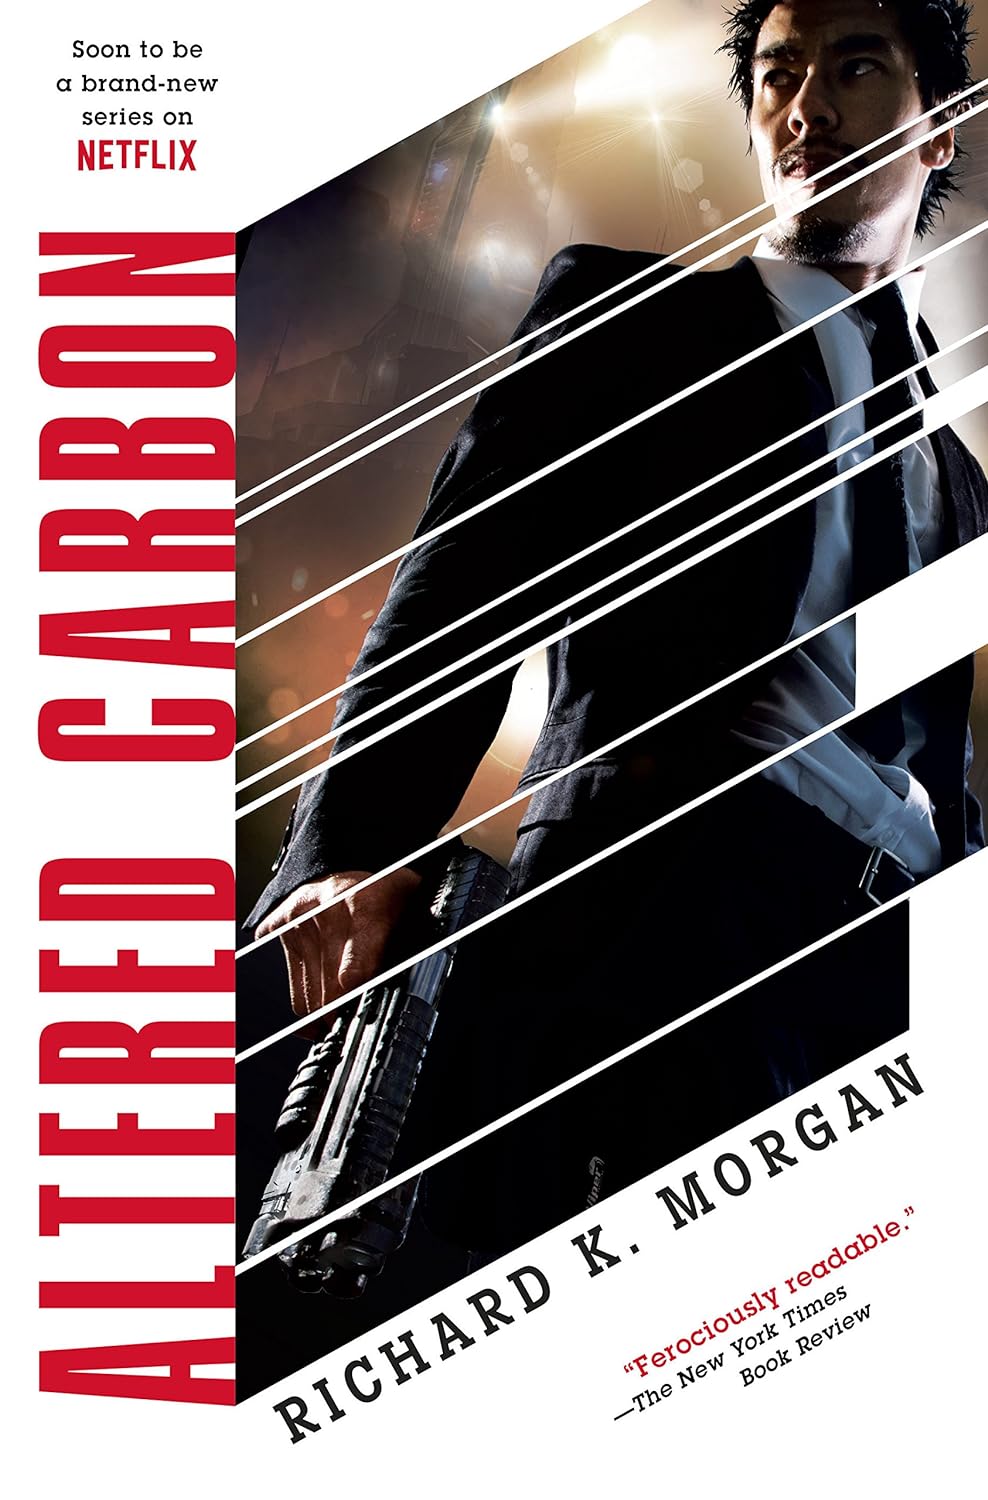 Altered Carbon by Richard Morgan (2002)